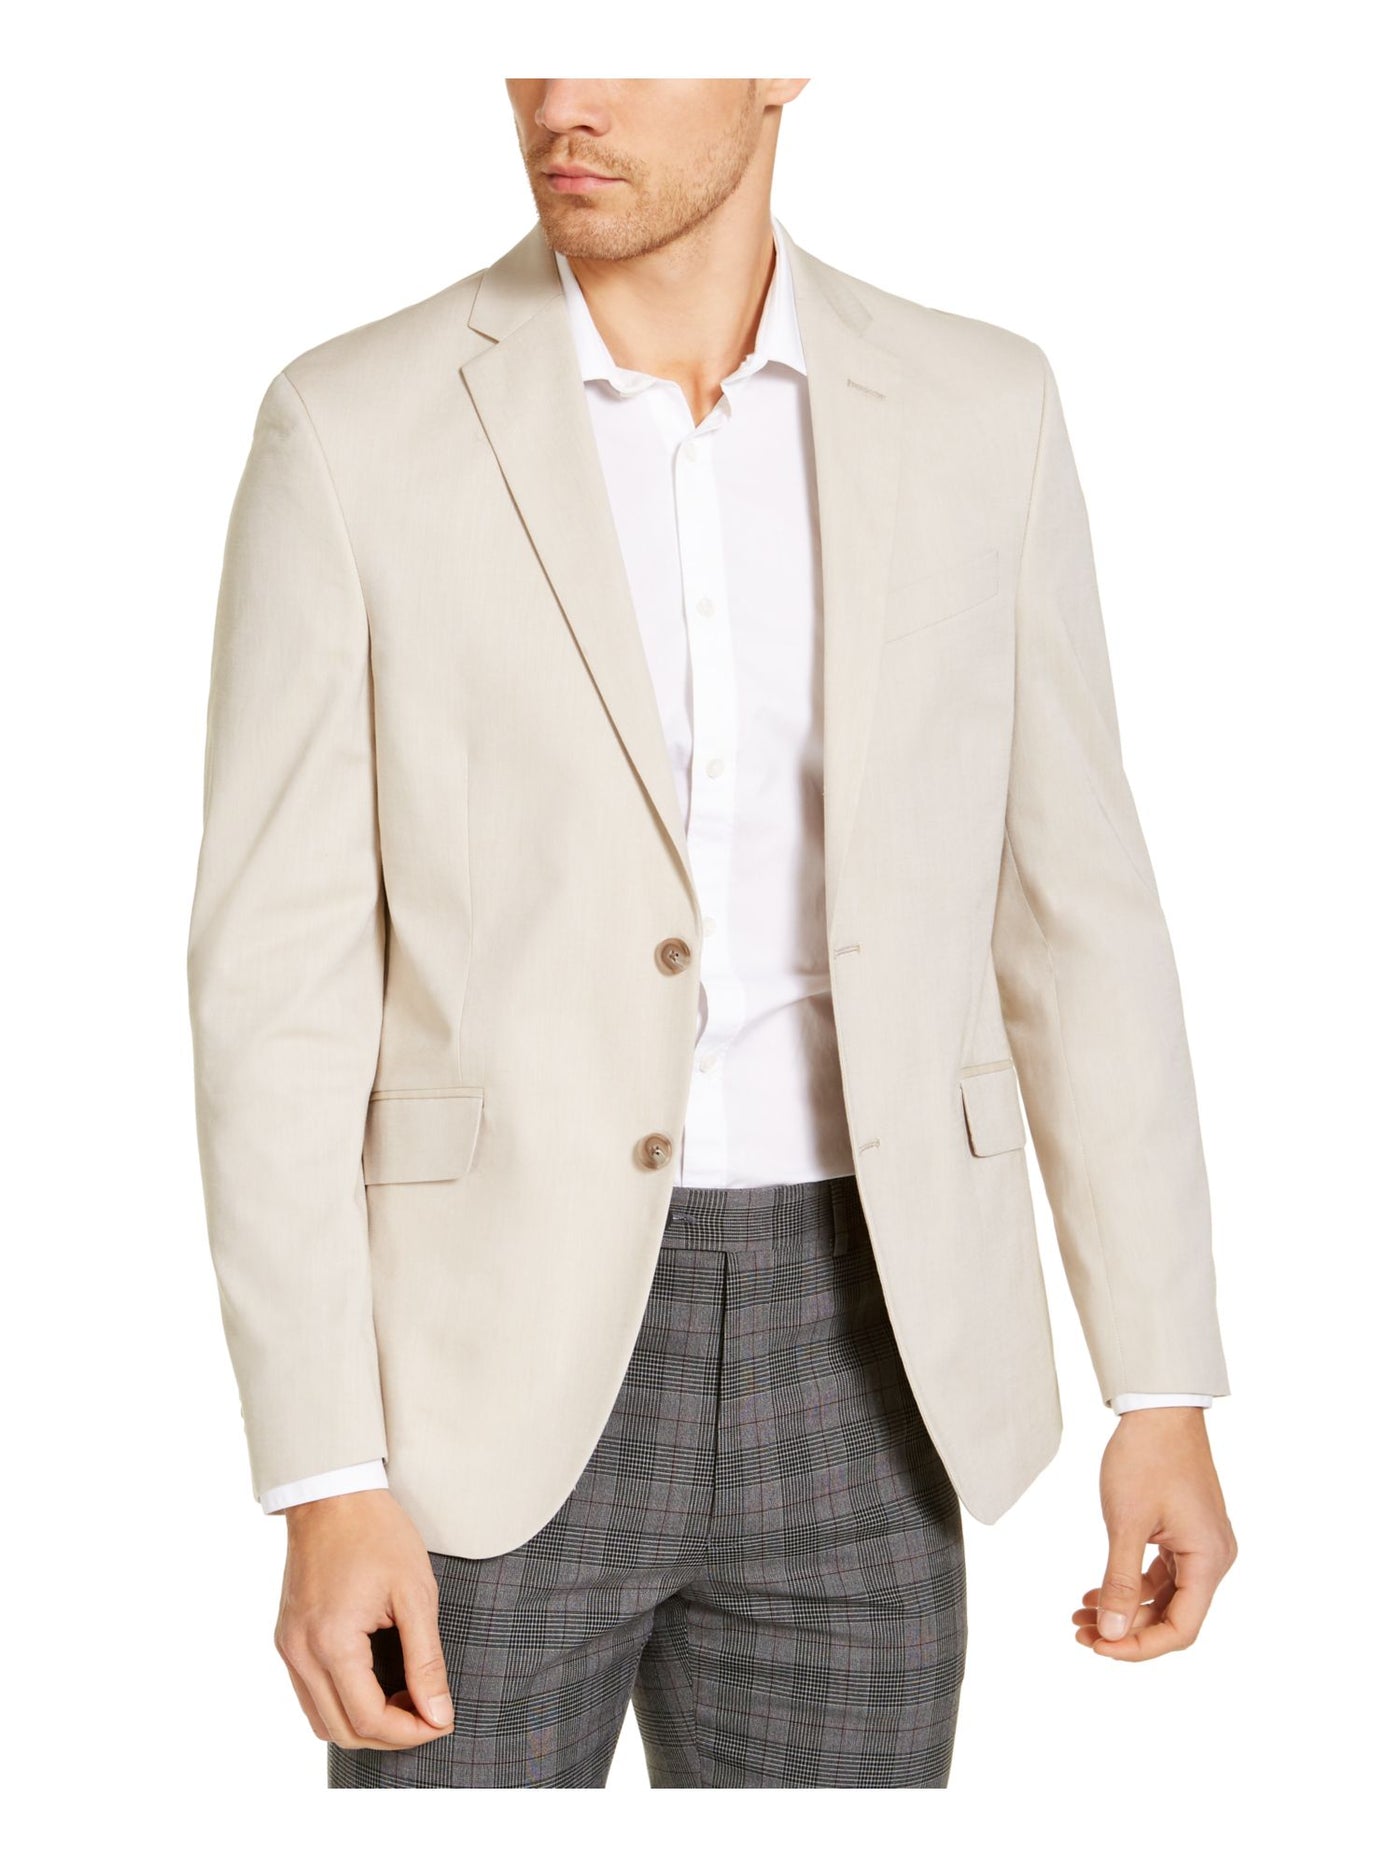 UNLISTED BY KENNETH COLE Mens Beige Single Breasted, Slim Fit Chambray Blazer Sport Coat 40L